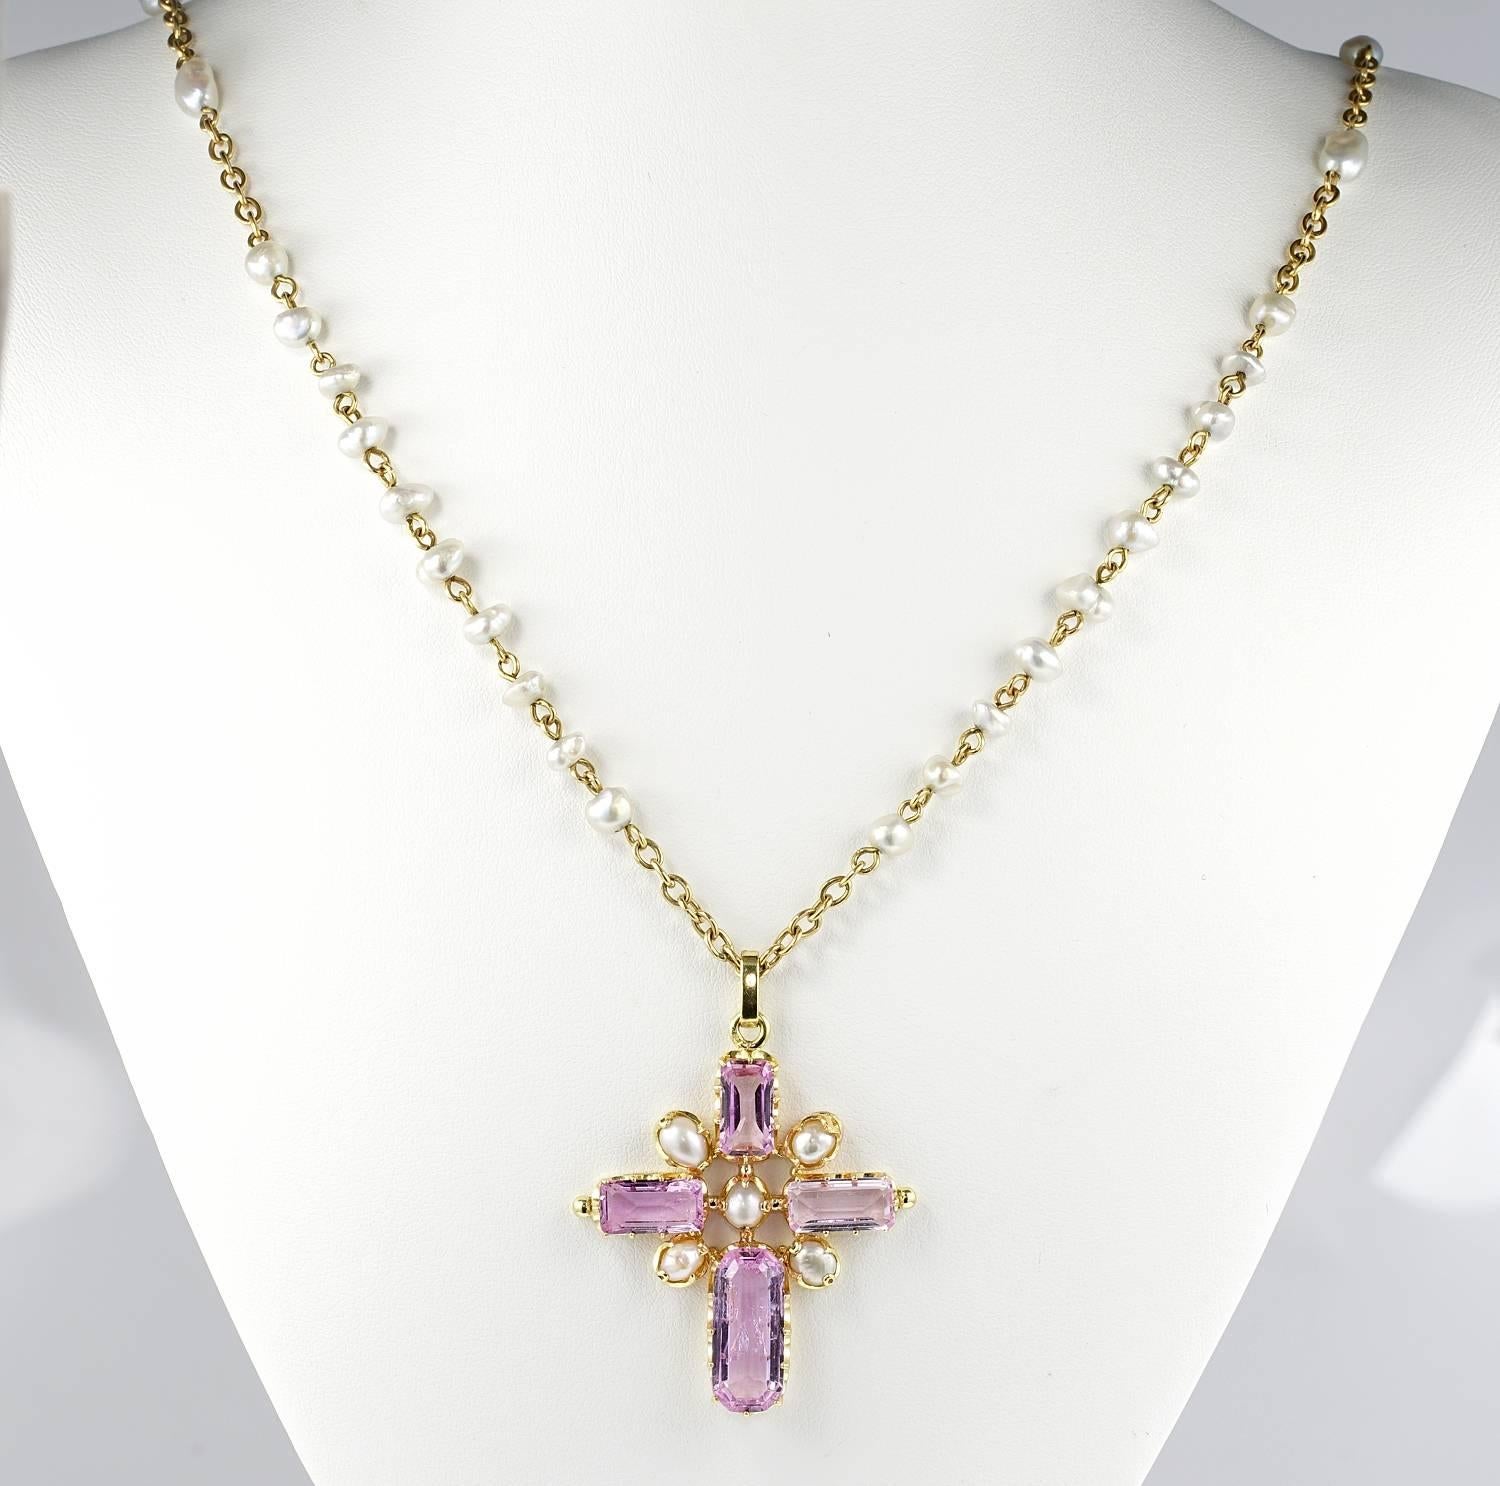 A magnificent Victorian example of large Latin cross with dedicated chain.
French origin with hallmarks. Artful crafted of solid 18 Kt gold with a superb chain hand wired with Natural salt water Pearls varying in sizes and shape.
Pearls are 100%